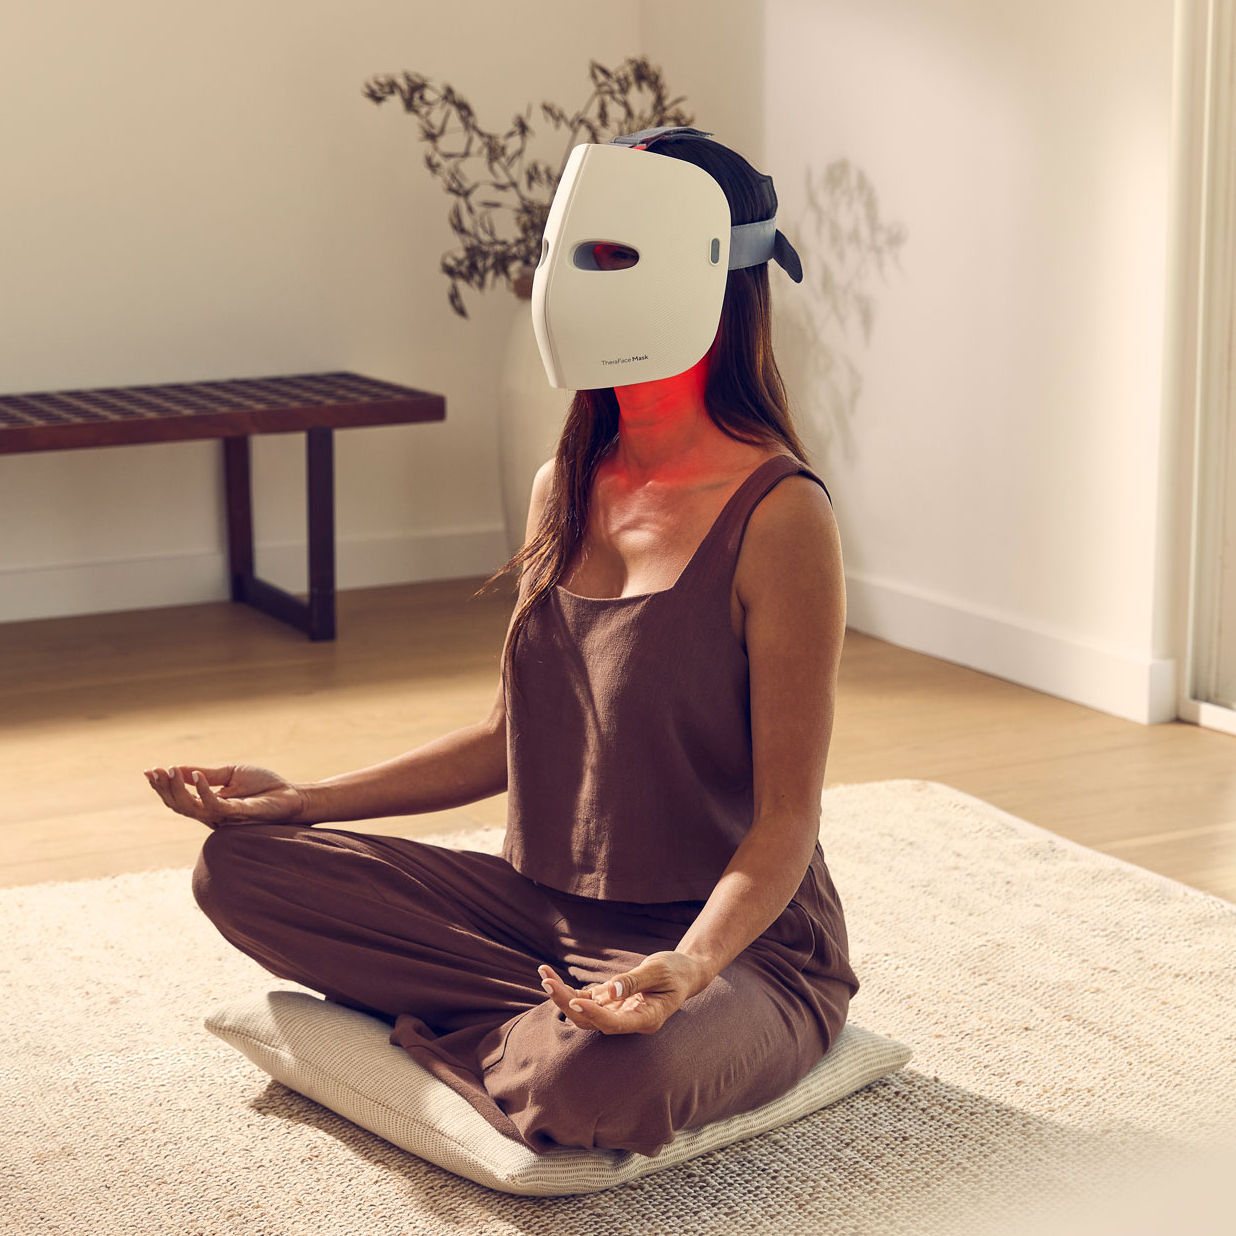 Theraface Advanced LED Skincare Mask with Relaxing Vibration Therapy